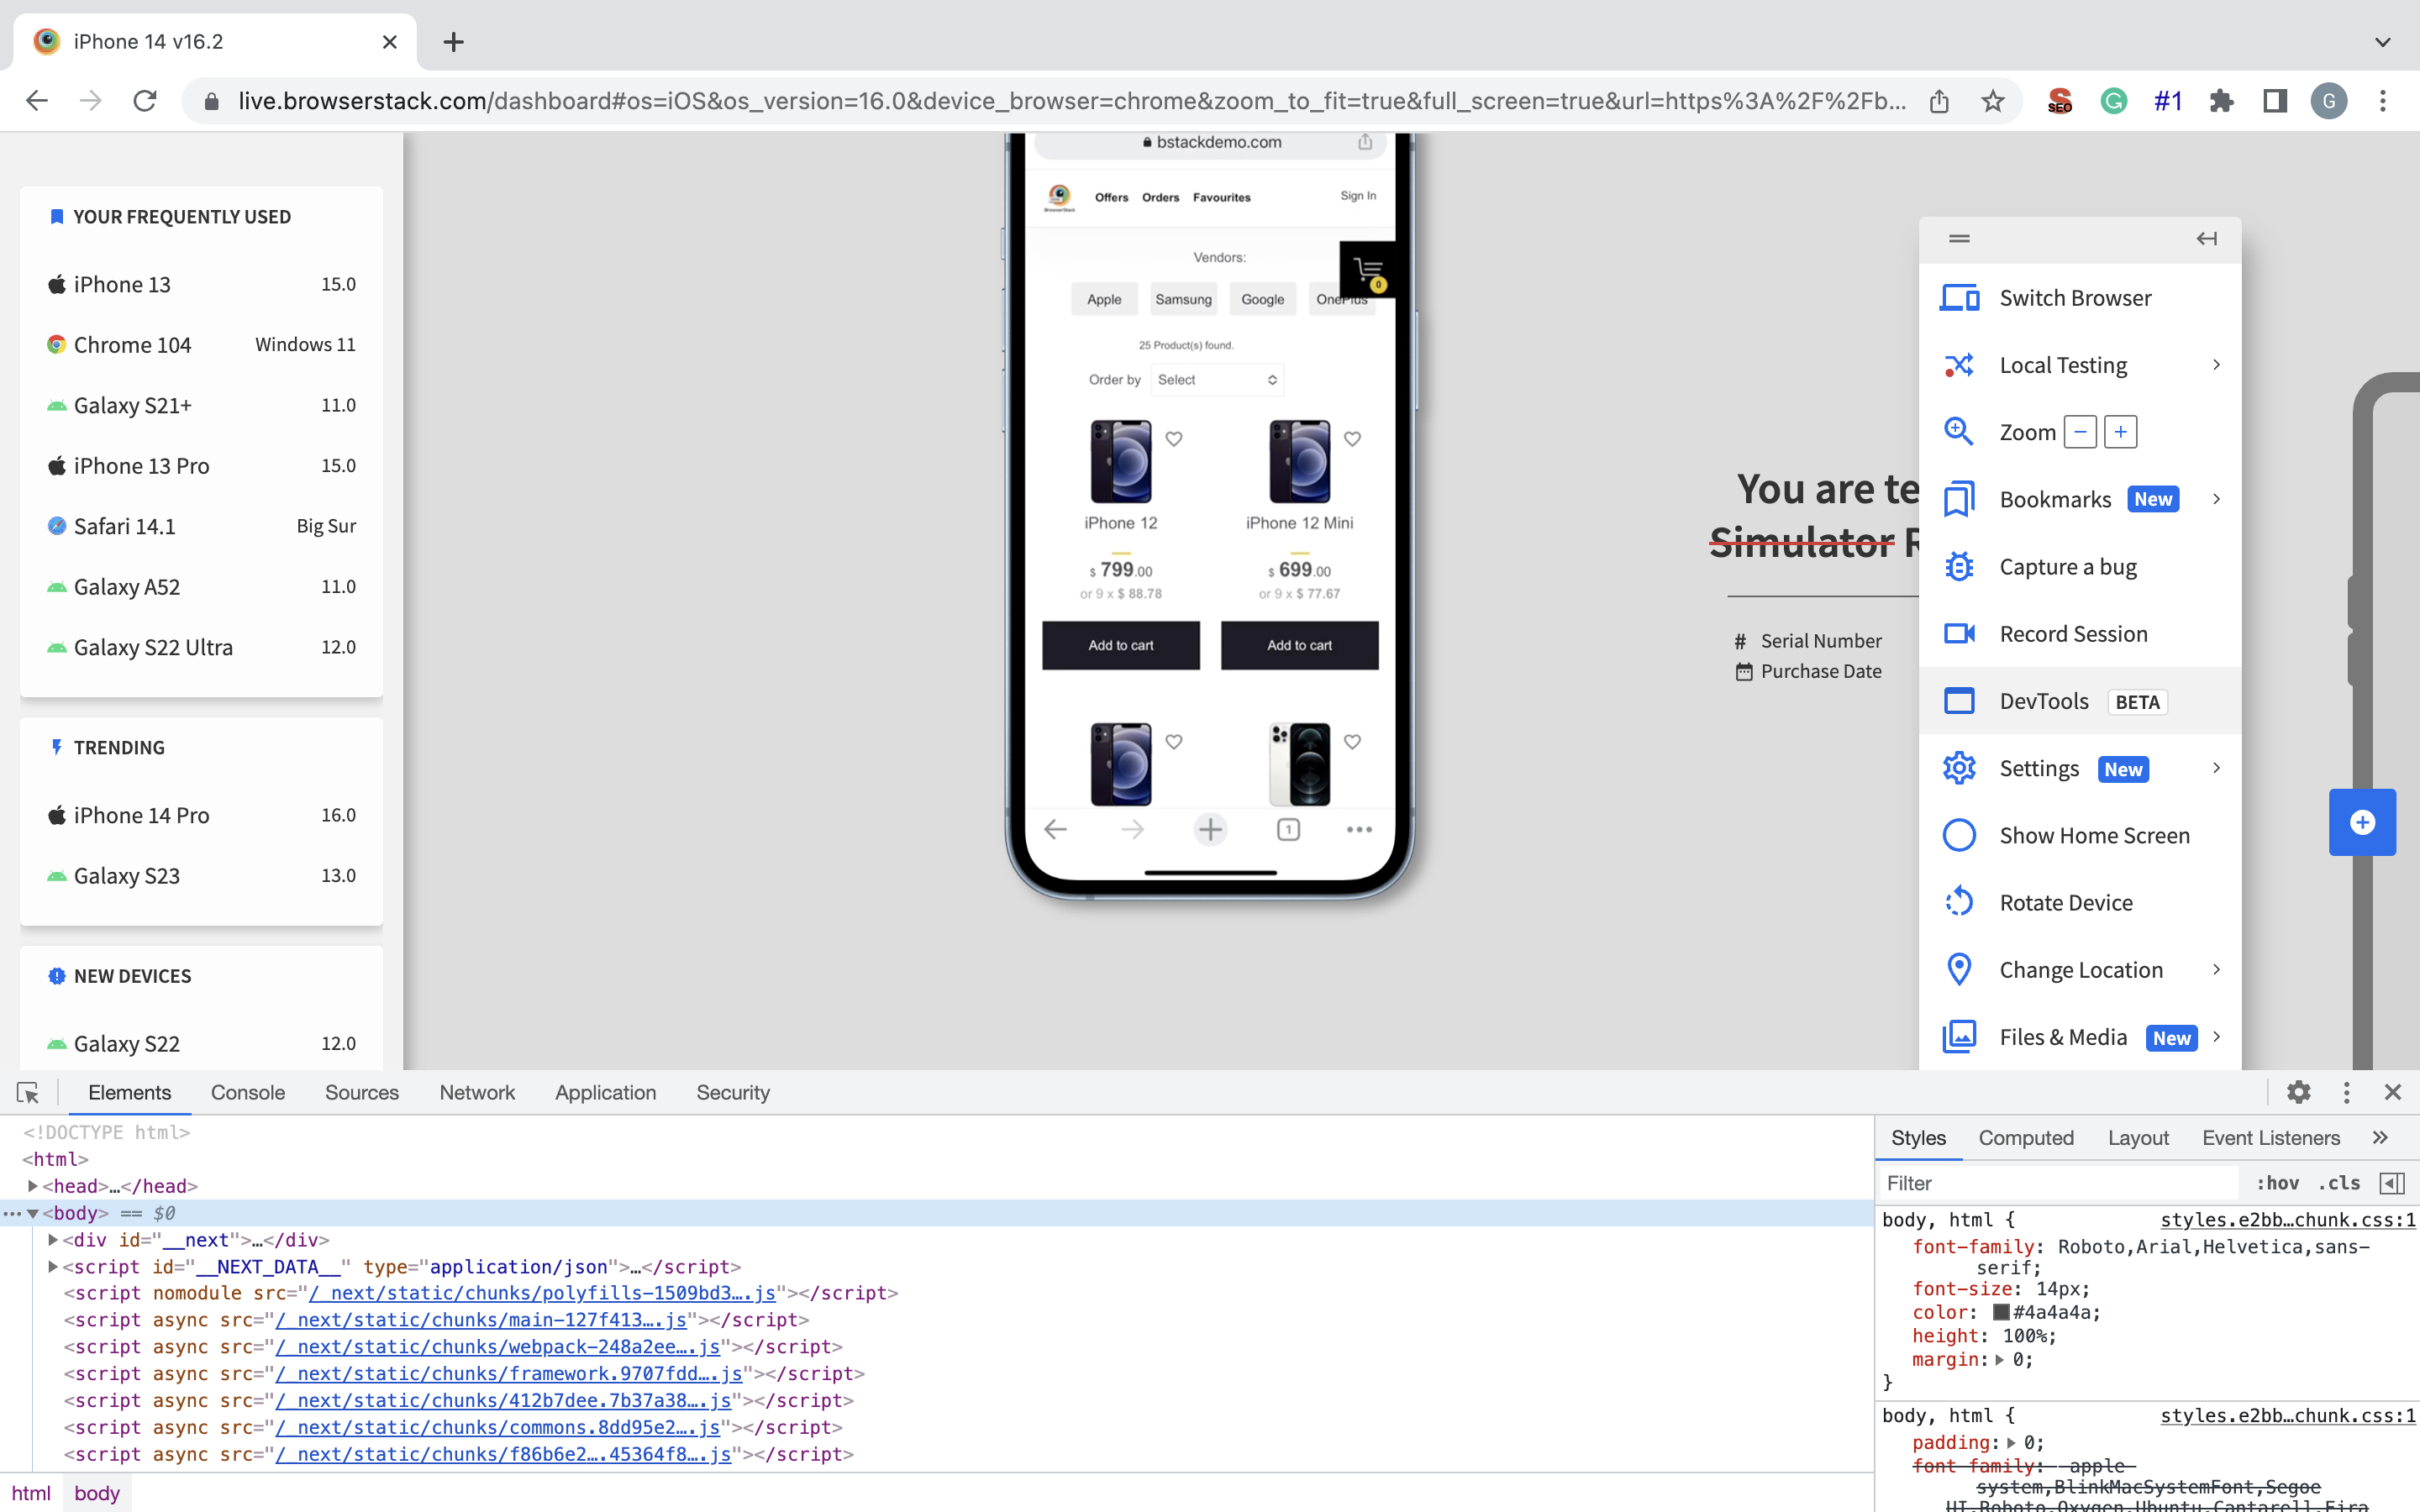 Inspect Element on iPhone using Devtools